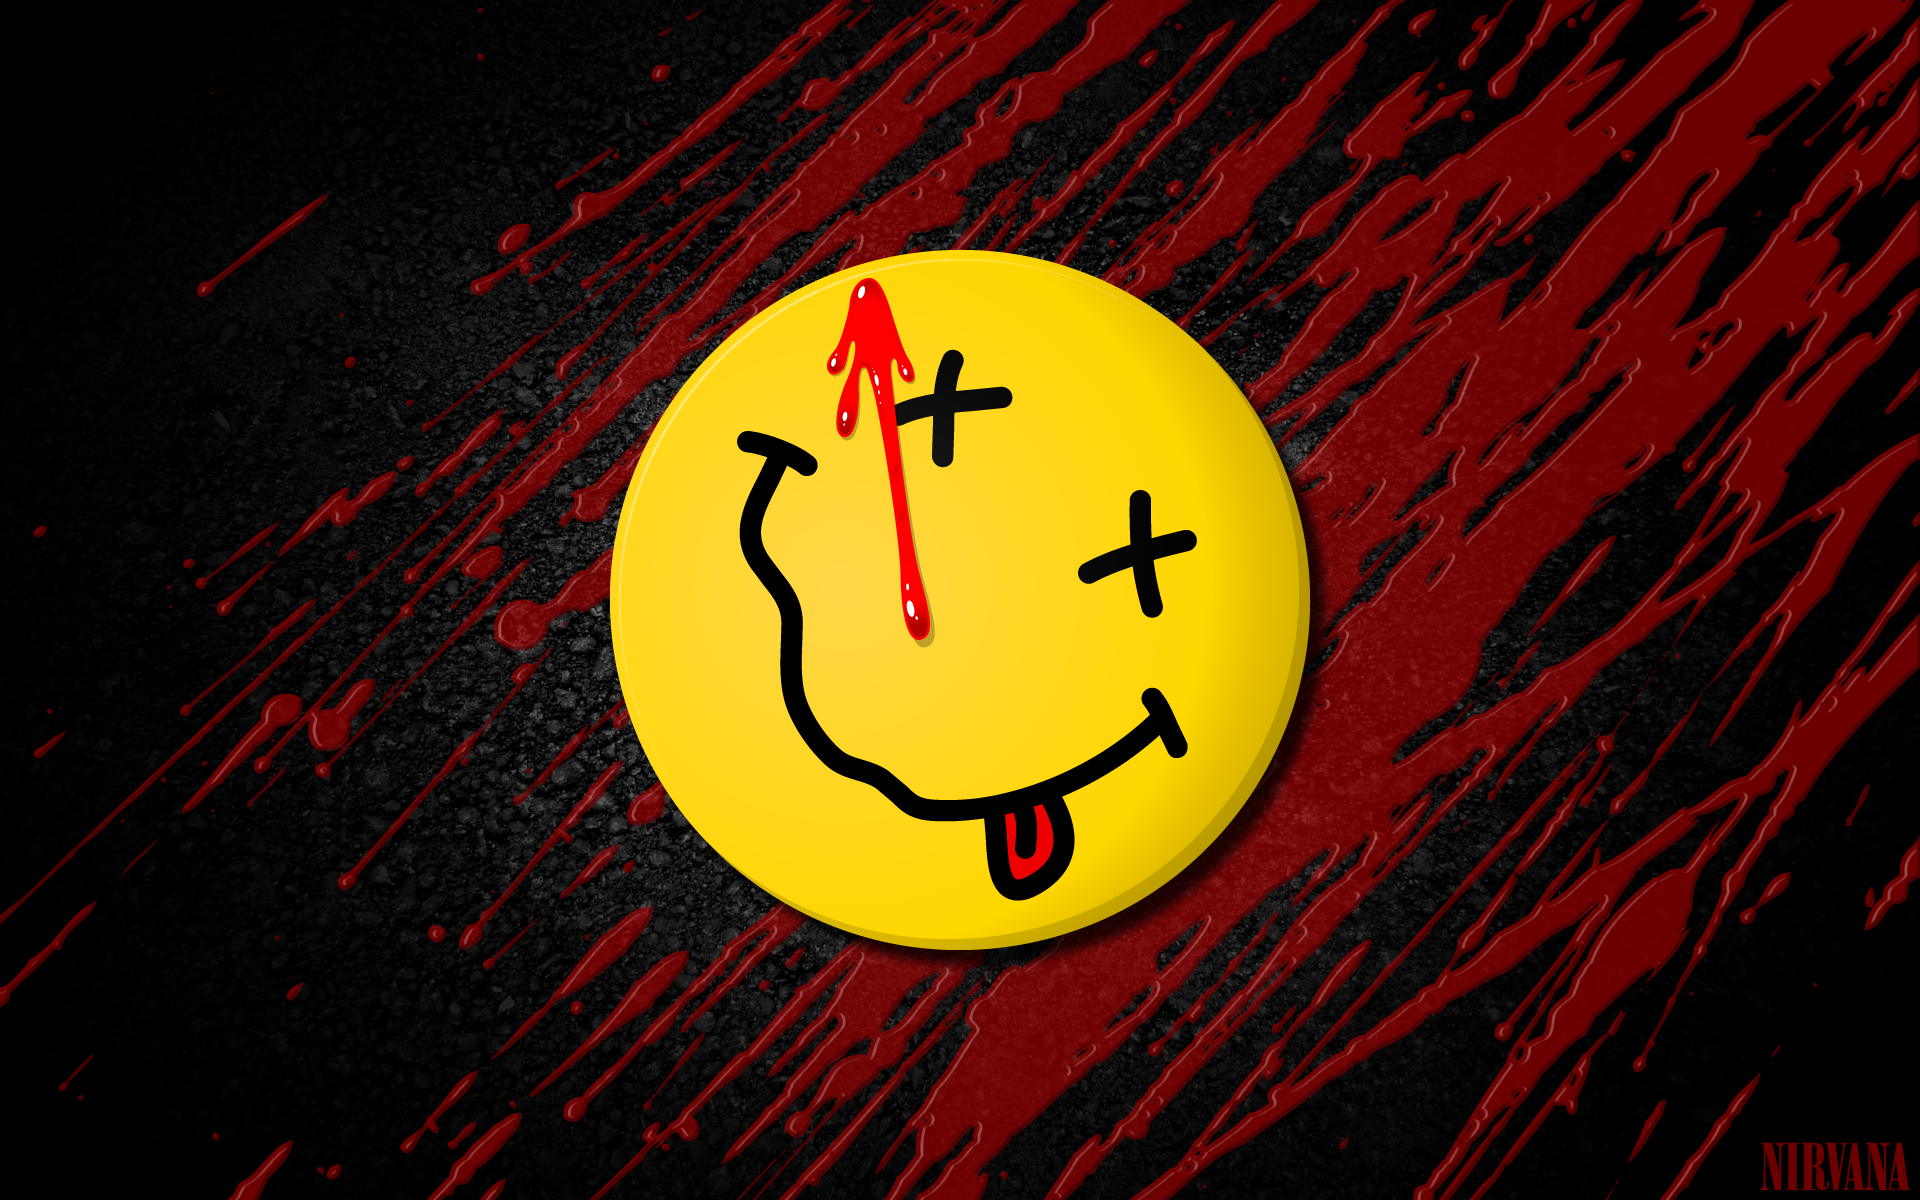 Gallery For gt Nirvana Smiley Face Background